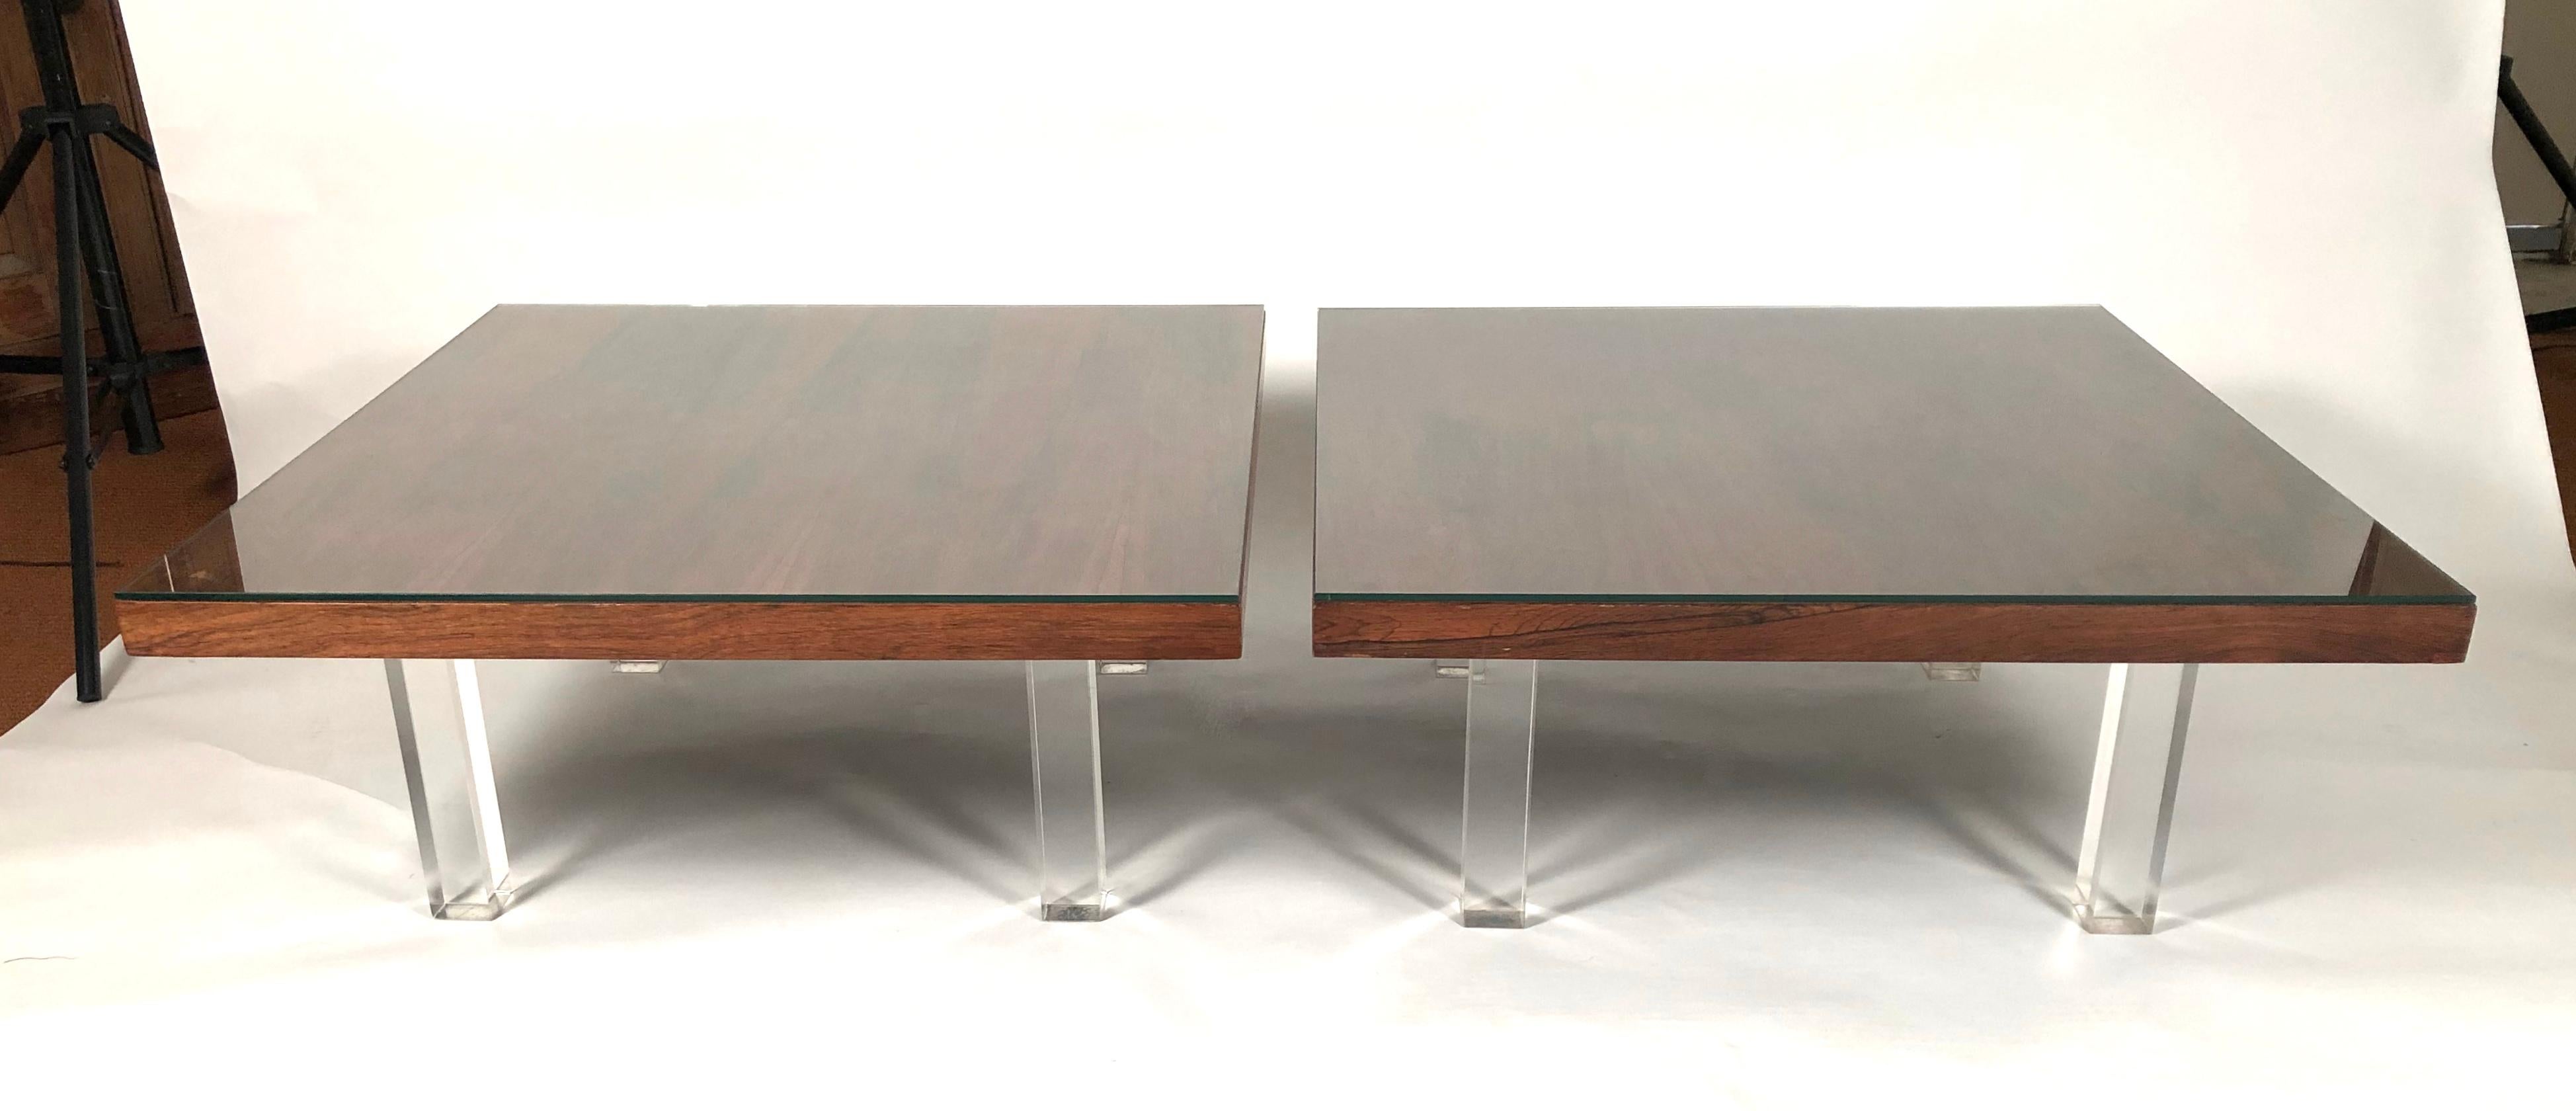 Two Milo Baughman Rosewood and Lucite Coffee Tables, circa 1967 2